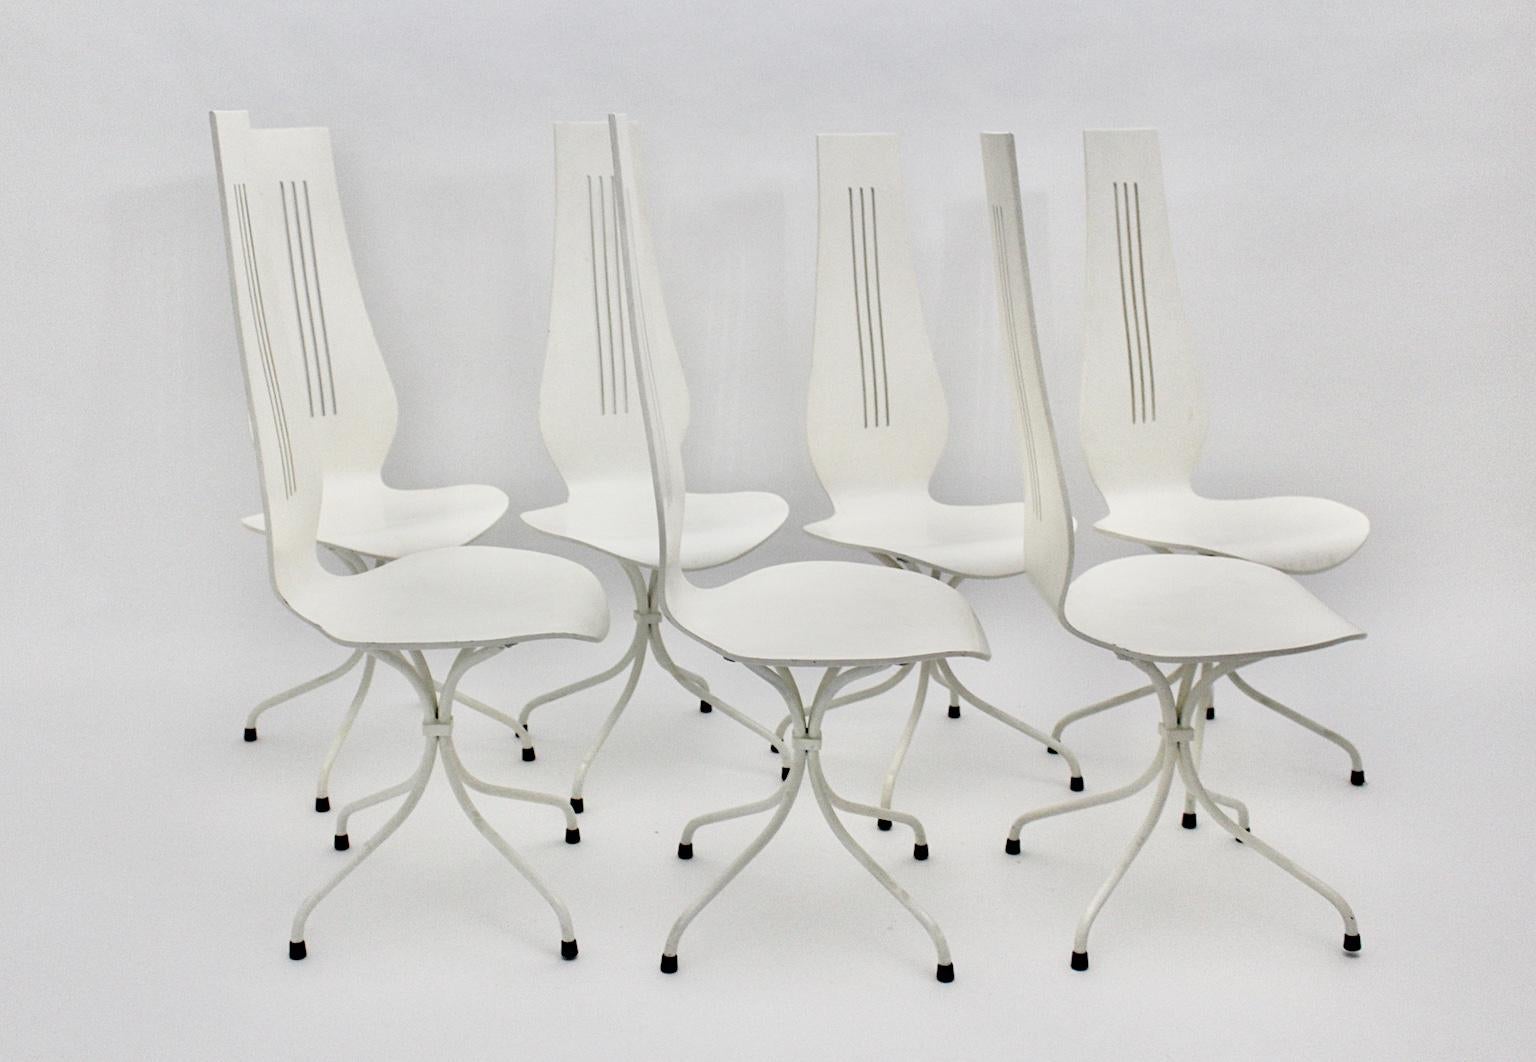 Steel Mid-Century Modern White Vintage Dining Chairs by Theo Häberli, 1960 Switzerland For Sale